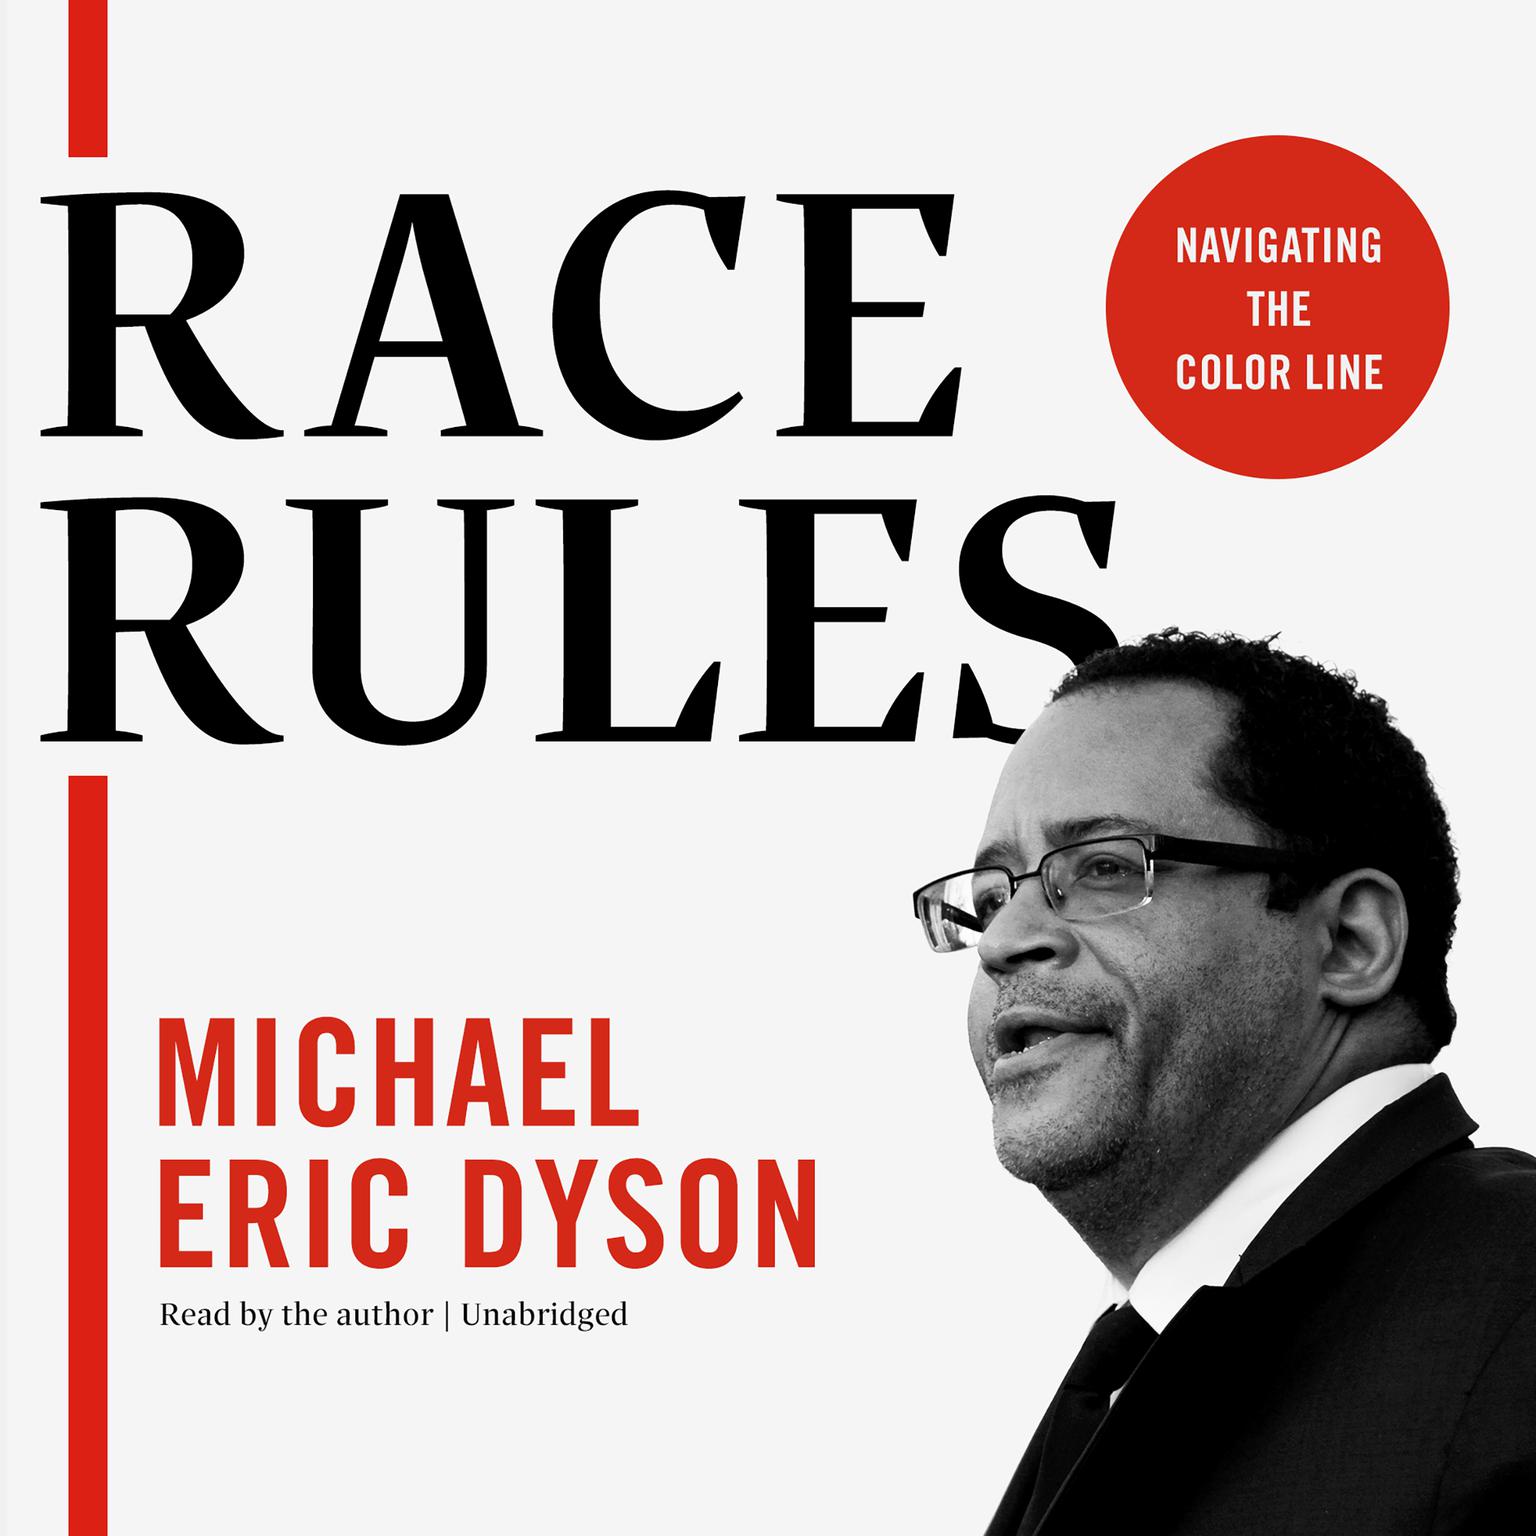 Race Rules (Abridged): Navigating the Color Line Audiobook, by Michael Eric Dyson